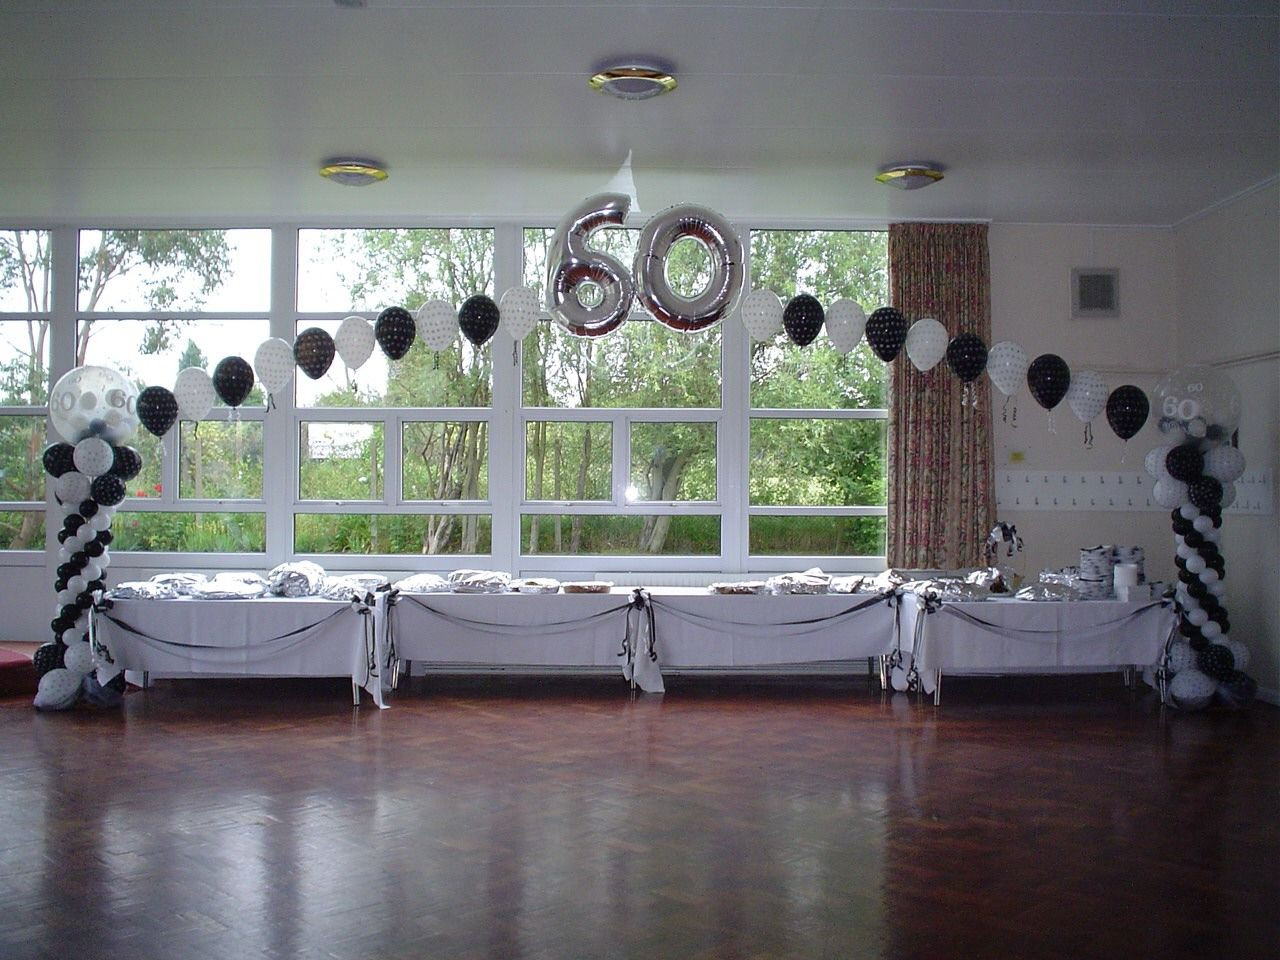 60Th Birthday Party Decoration Ideas
 Image detail for you so much for the lovely balloons for